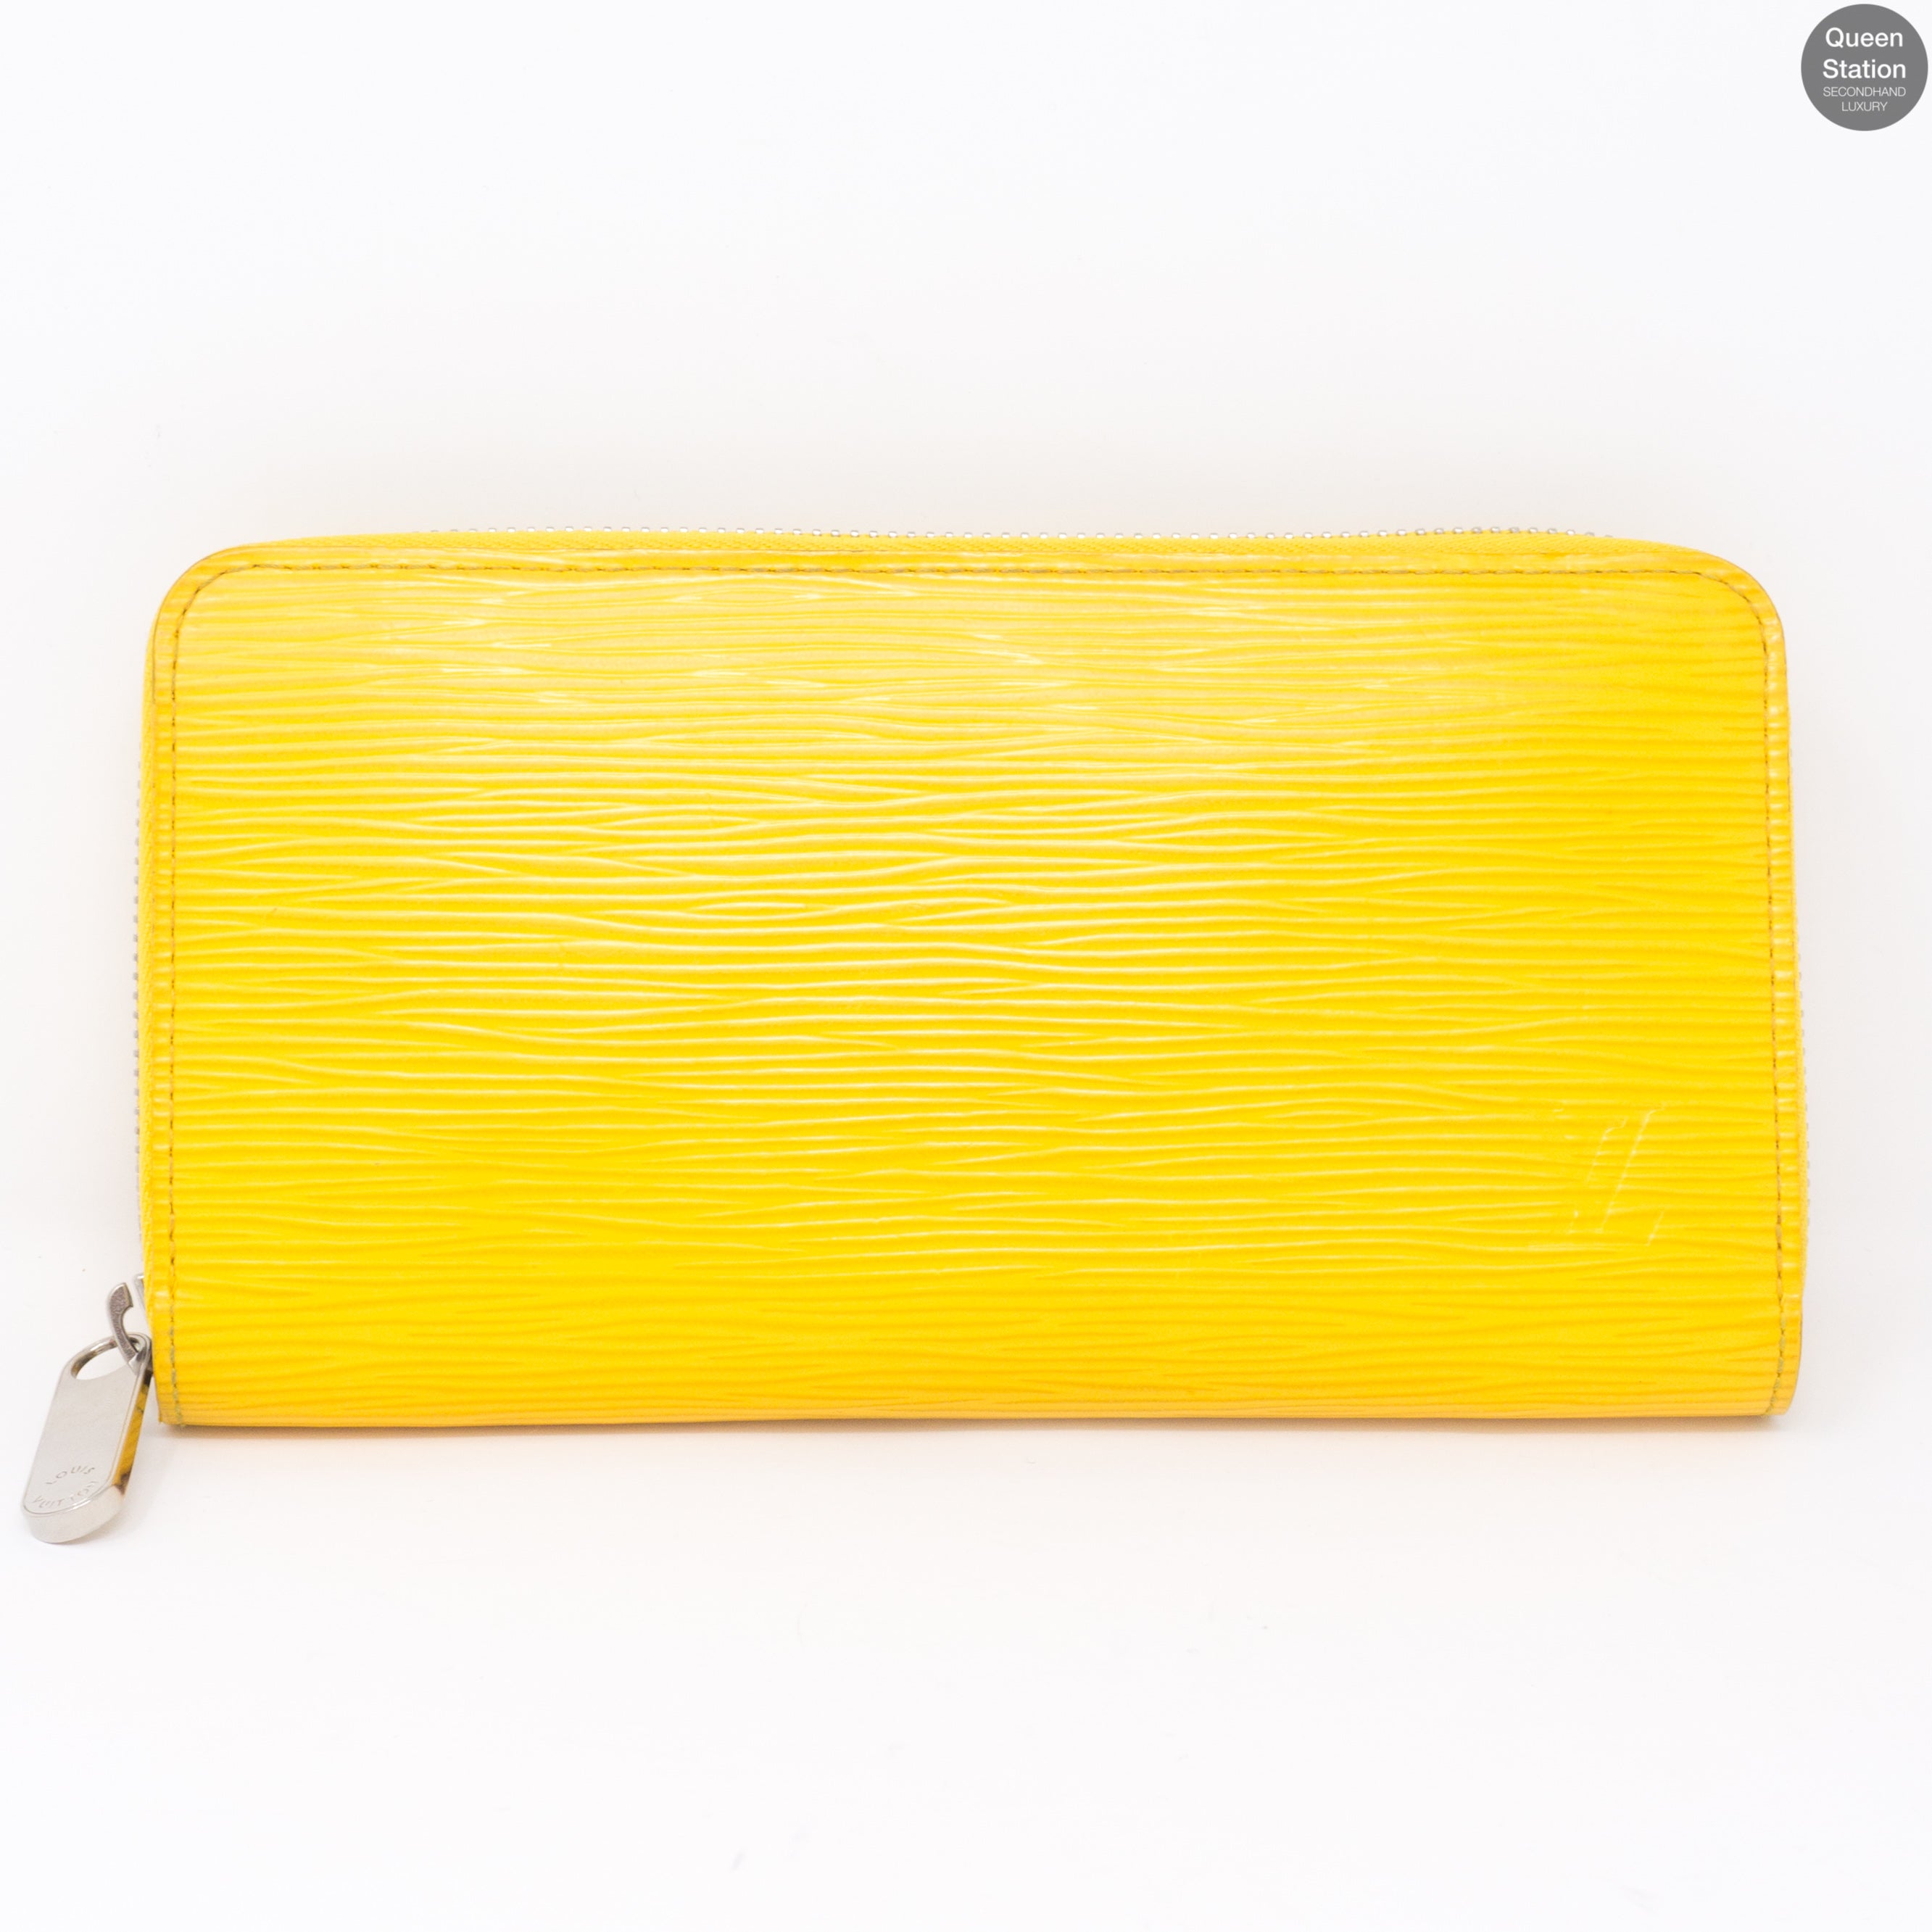 Yellow epi leather wallet, was wondering how common/rare these are